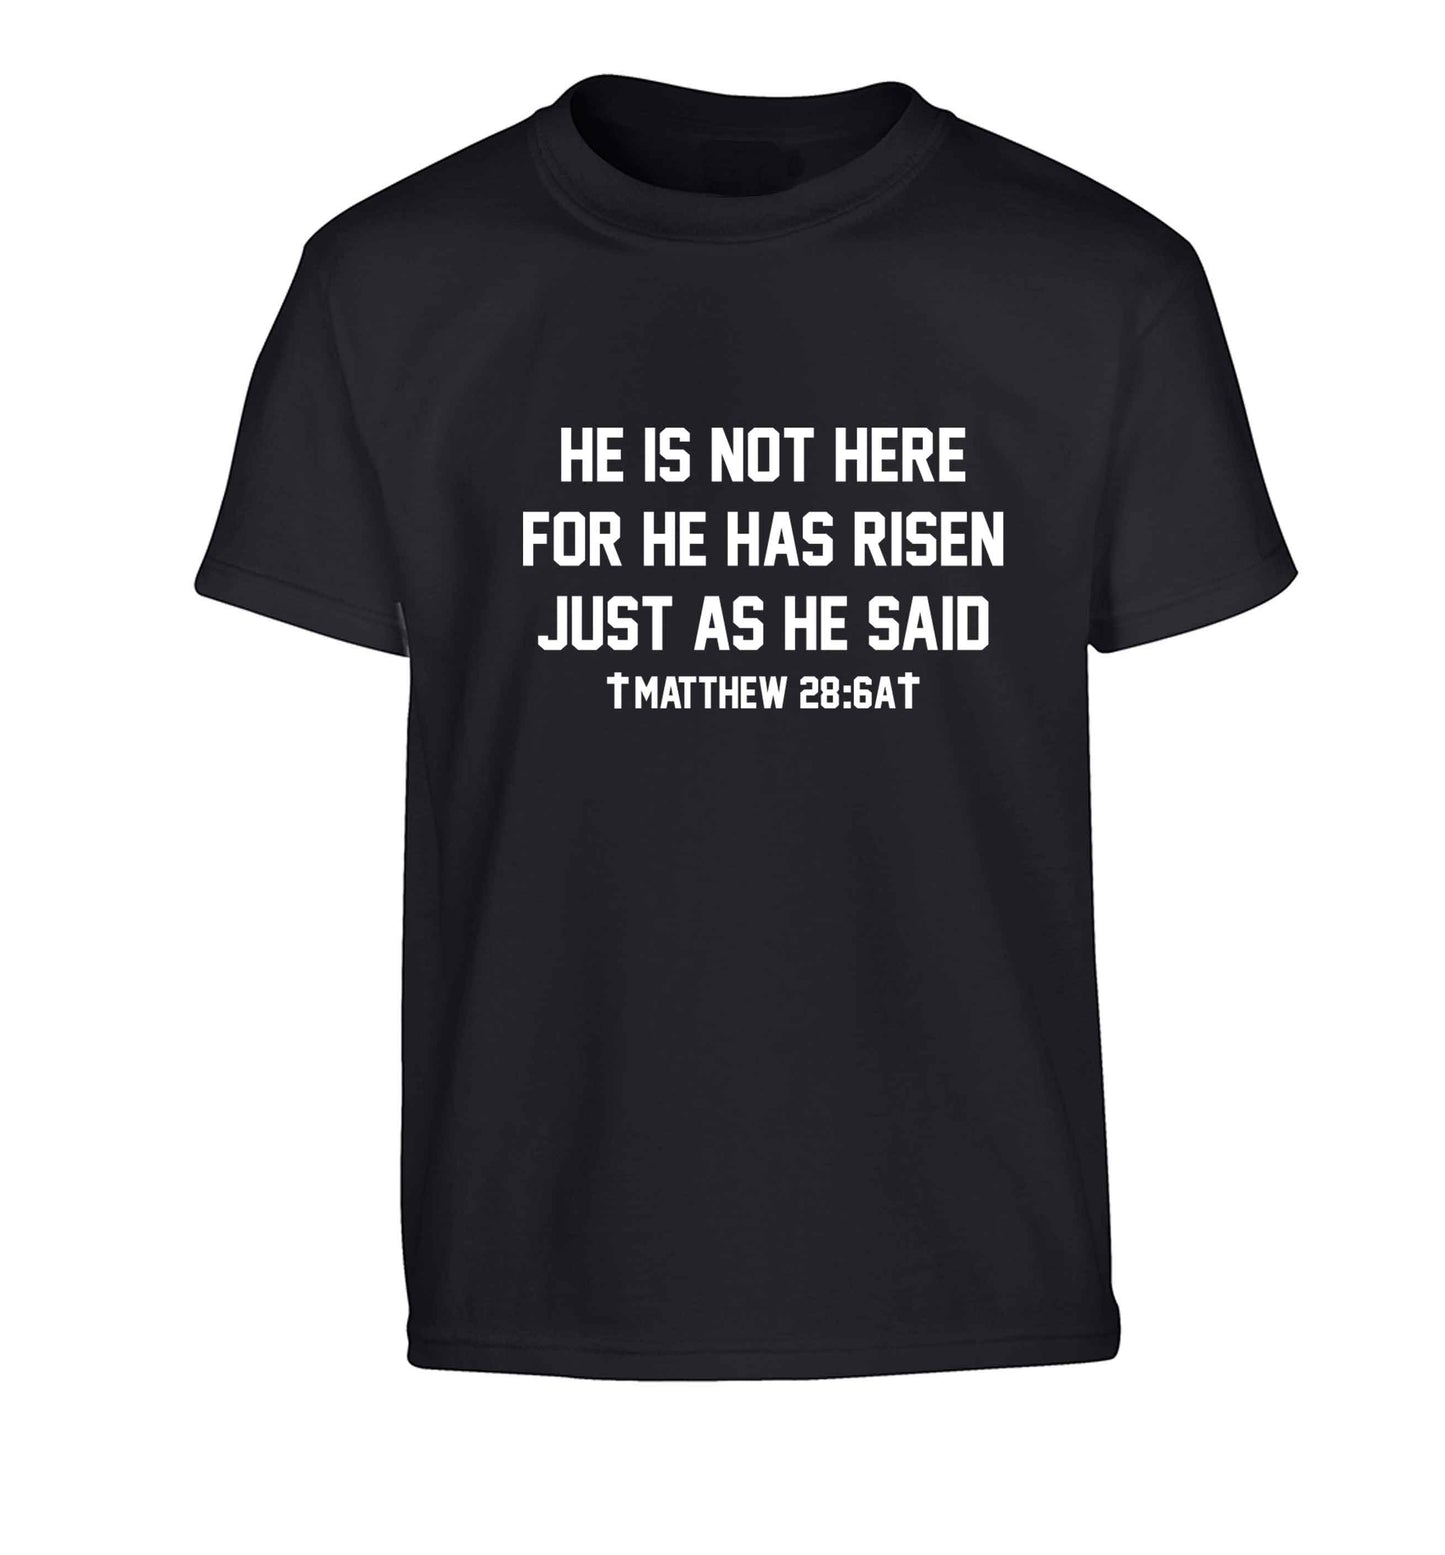 He is not here for he has risen just as he said matthew 28:6A Children's black Tshirt 12-13 Years